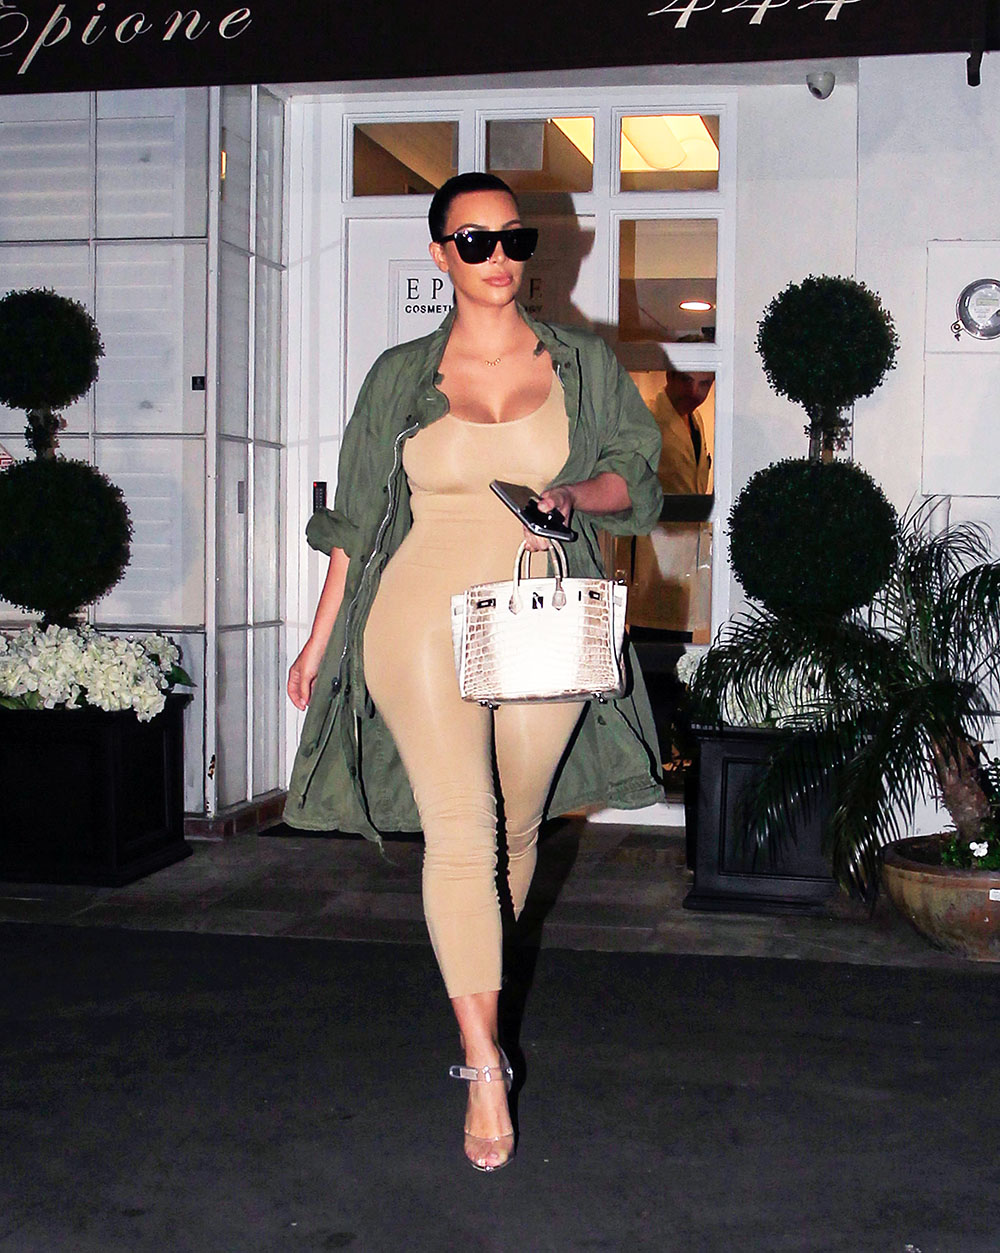 Reality star Kim Kardashian spotted out and about in Los Angeles, California. Kim accentuated her curves in a fitted beige bodysuit and carried a crocodile pattern purse. 02 Mar 2016 Pictured: Kim Kardashian. Photo credit: MEGA TheMegaAgency.com +1 888 505 6342 (Mega Agency TagID: MEGA26992_001.jpg) [Photo via Mega Agency]